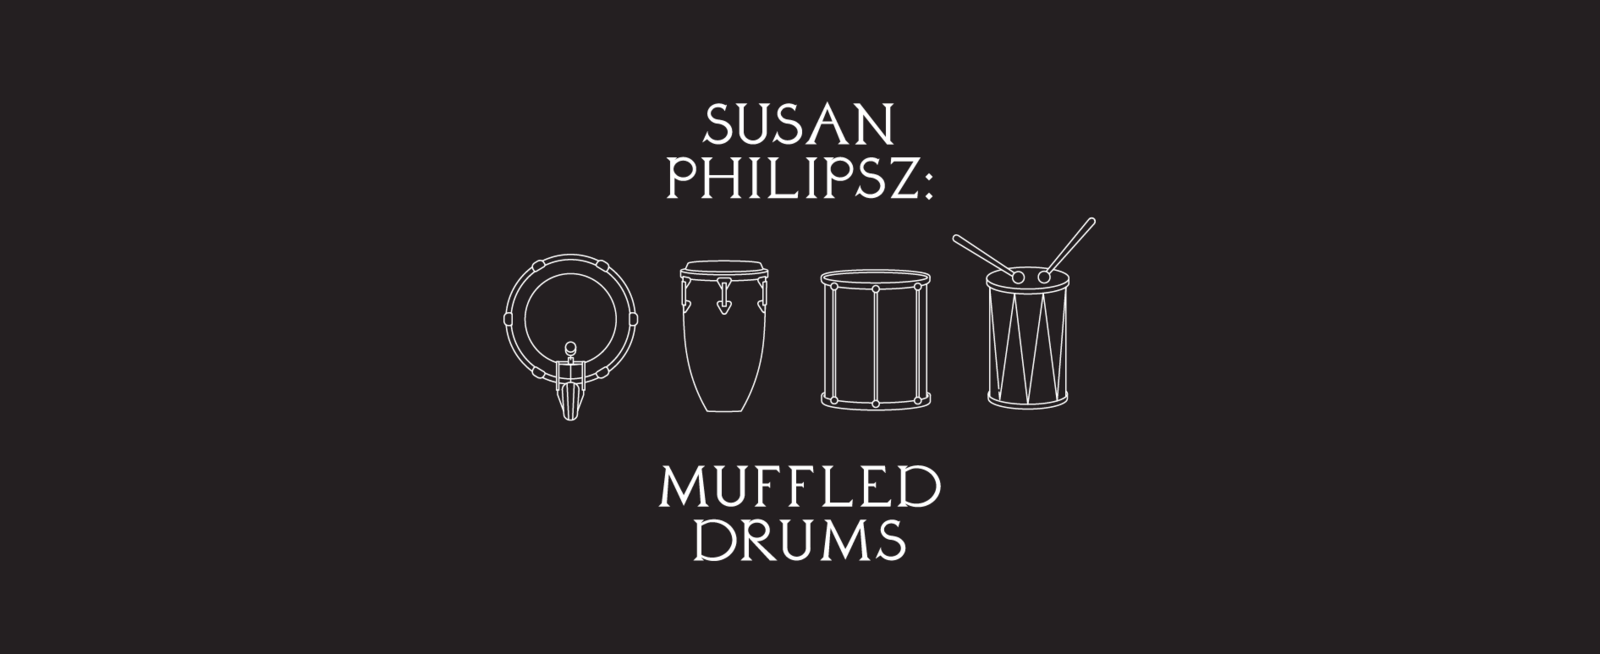 illustrations of drums paired with typography that says "susan philipsz: muffled drums"